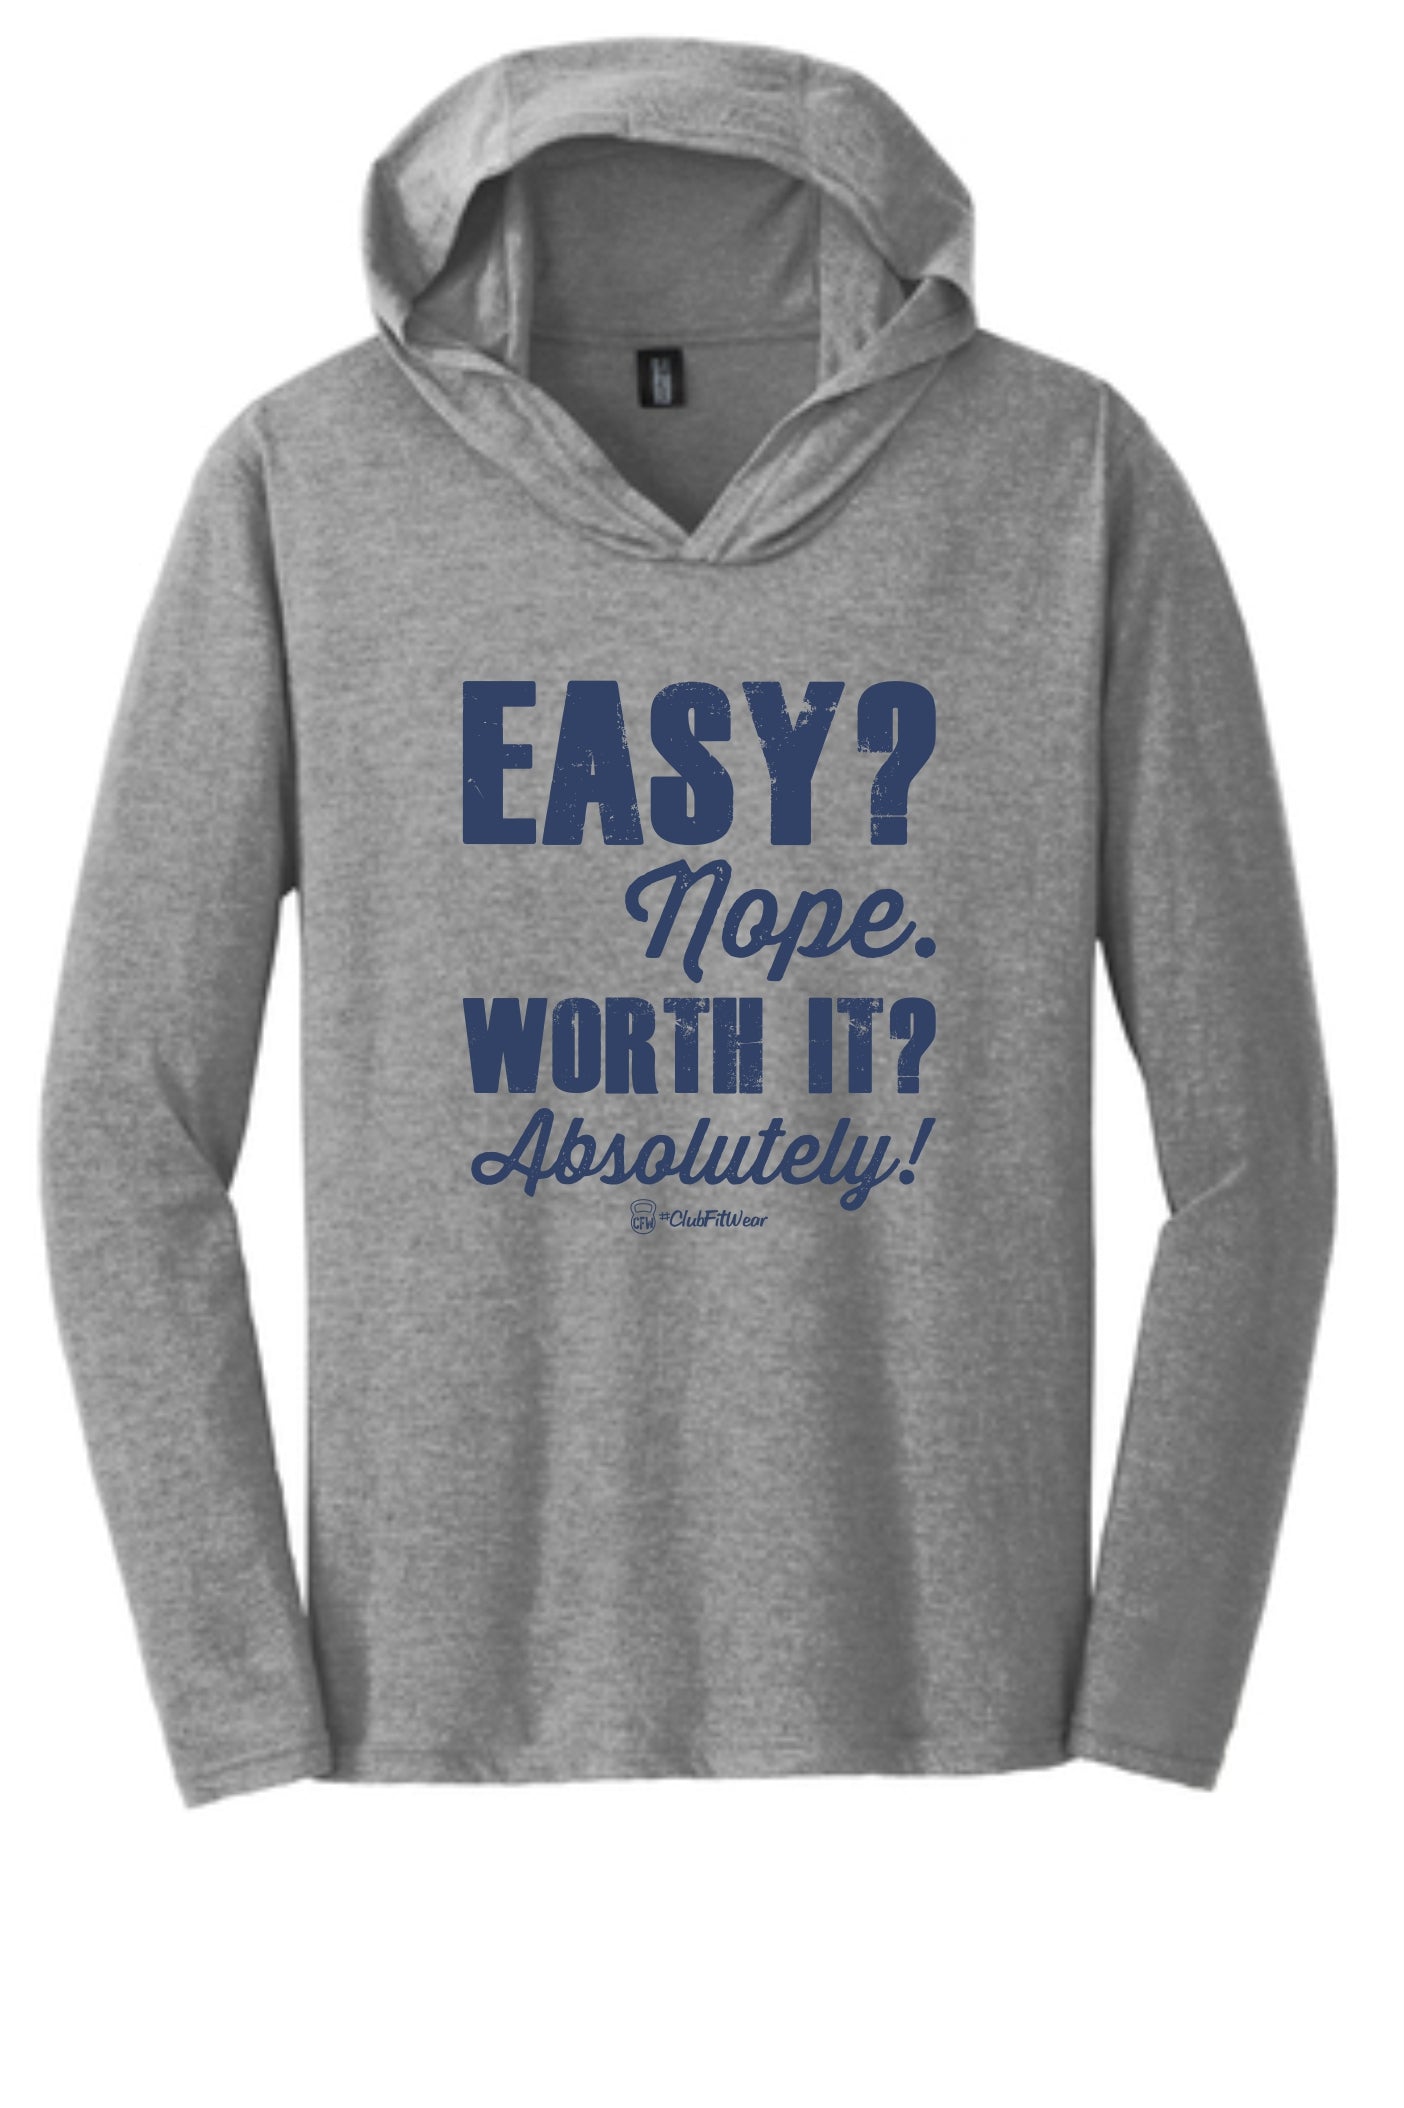 Easy? Nope. Worth it? Absolutely! - Unisex Hooded Pullover